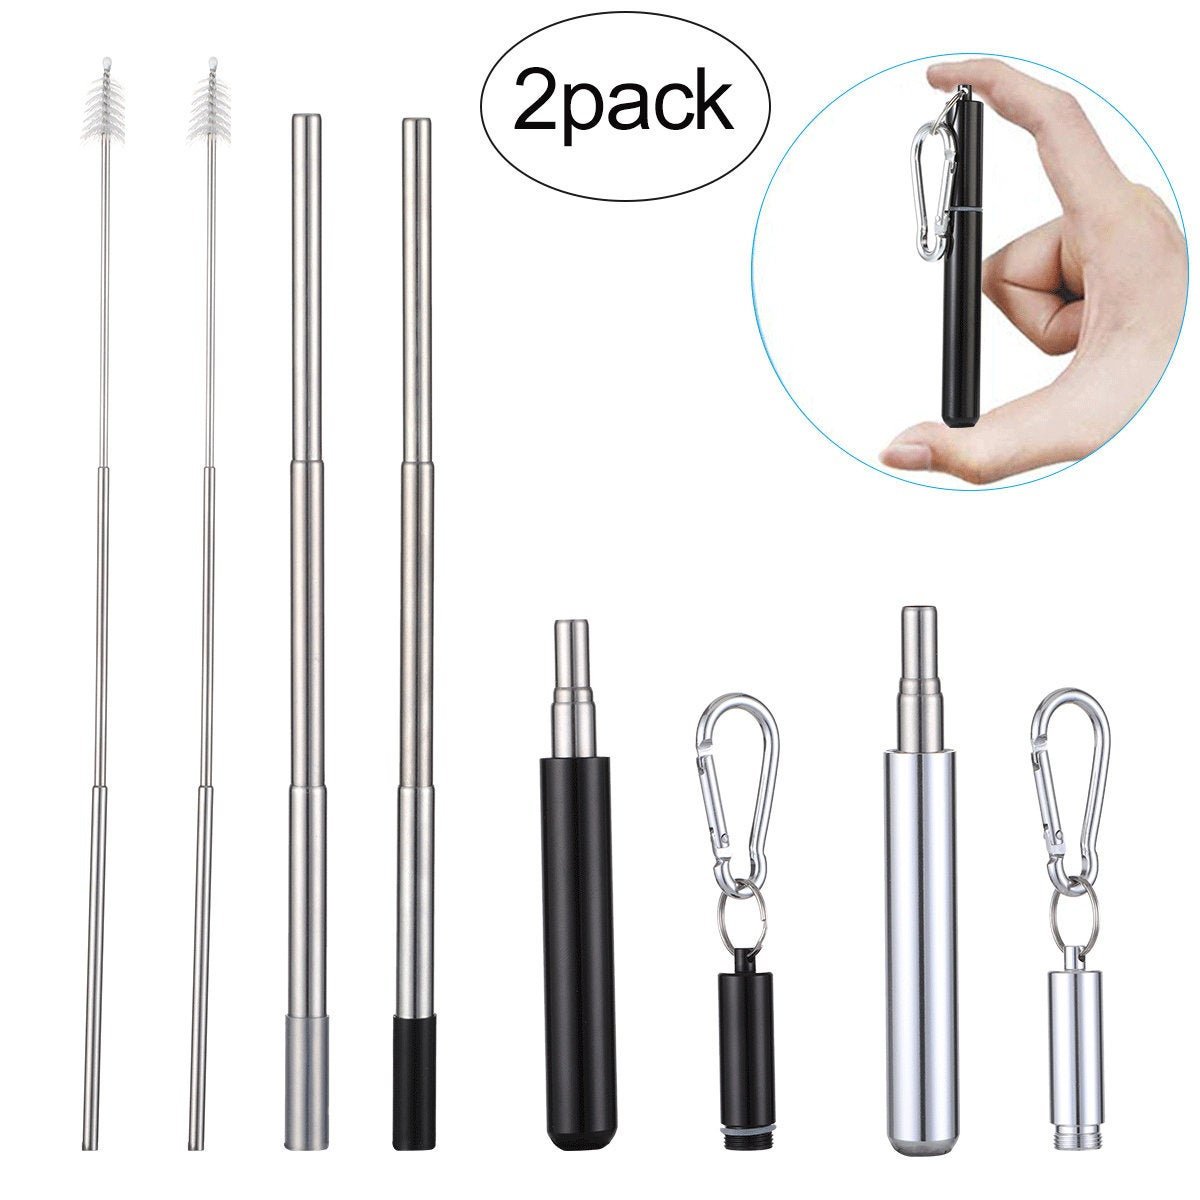 Excited to share the latest addition to my #etsy shop: Stainless Steel Drinking Straw Collapsible & Adjustable 2 PACK etsy.me/2Ys1nO6 #housewares #black #metal #metalstraw #collapsiblestraw #reusablestrawincase #stainlesssteelstraw #traveldrinkstraw #rcdshopus